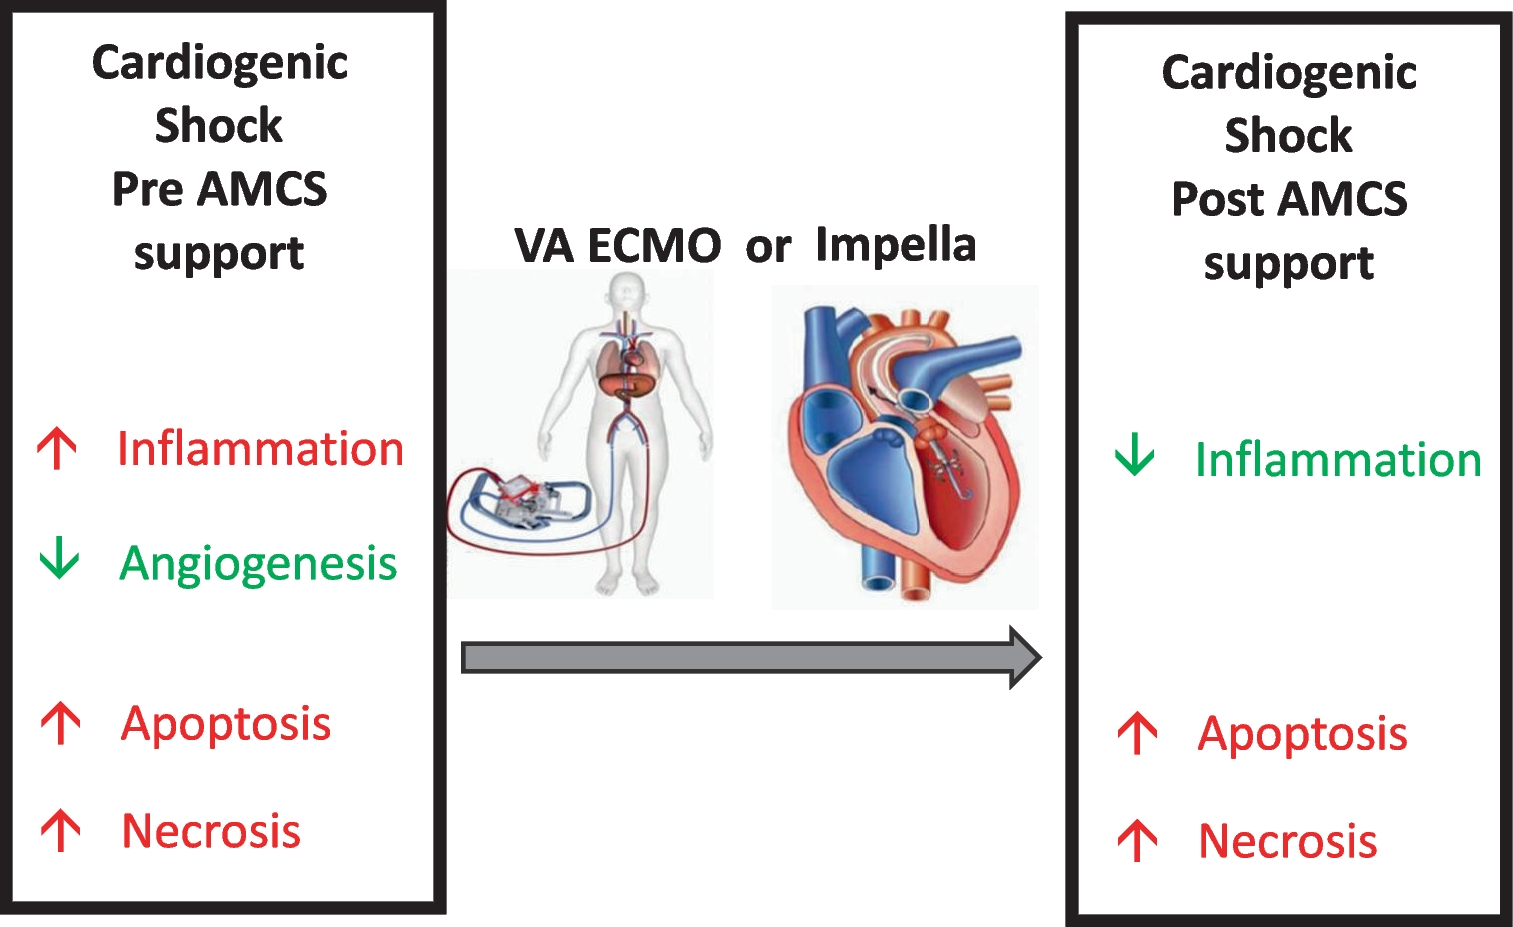 Circulating Proteome Analysis Identifies Reduced Inflammation After Initiation of Hemodynamic Support with Either Veno-Arterial Extracorporeal Membrane Oxygenation or Impella in Patients with Cardiogenic Shock